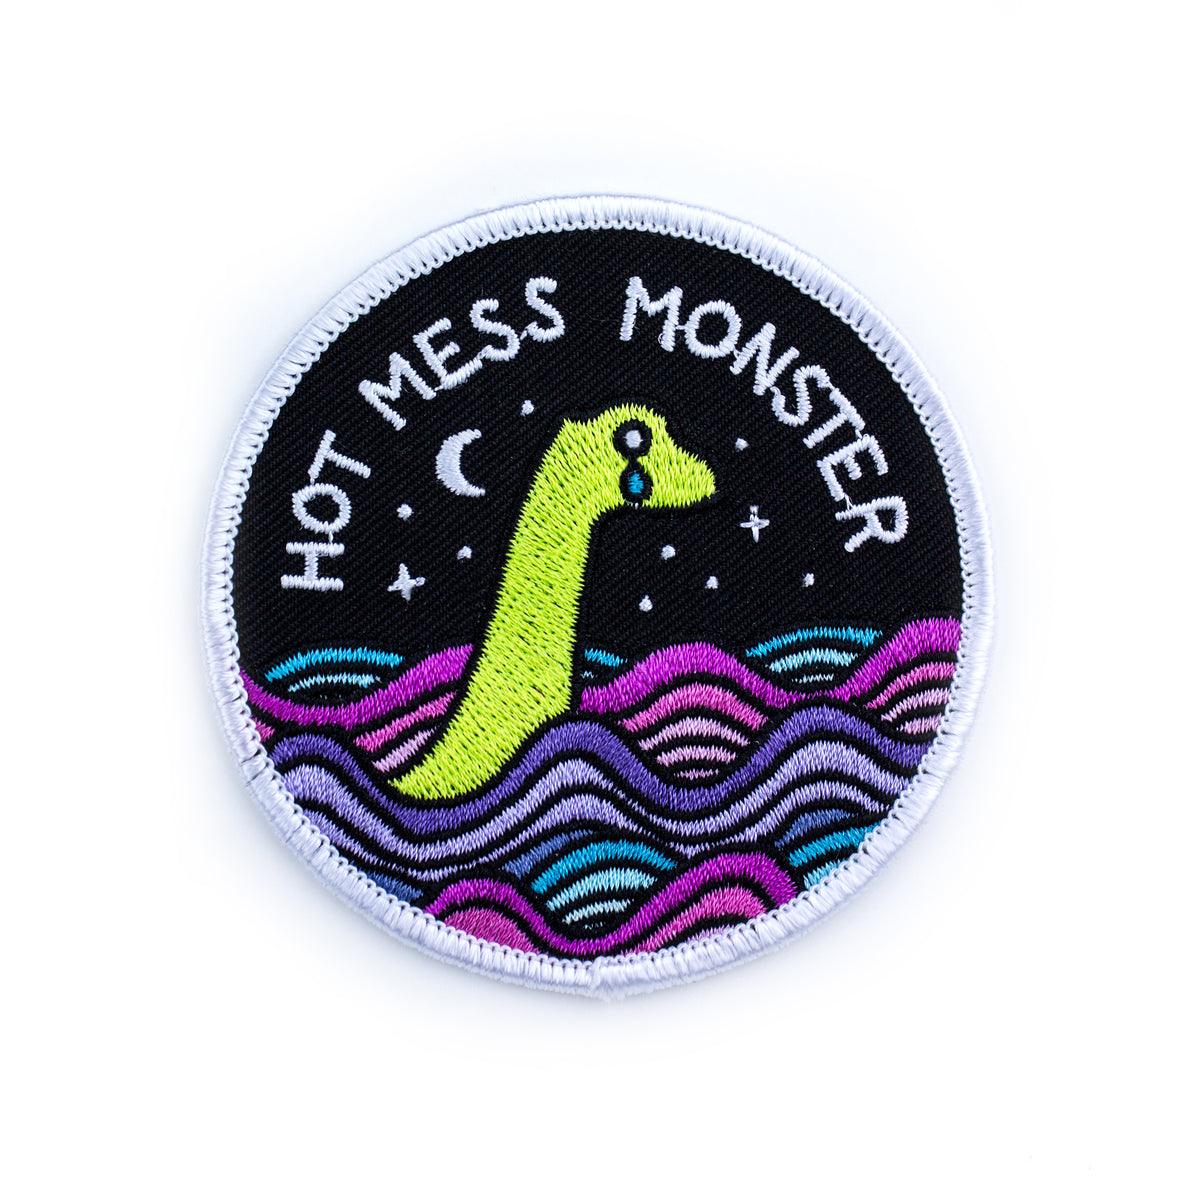 Hot Mess Monster // Patch